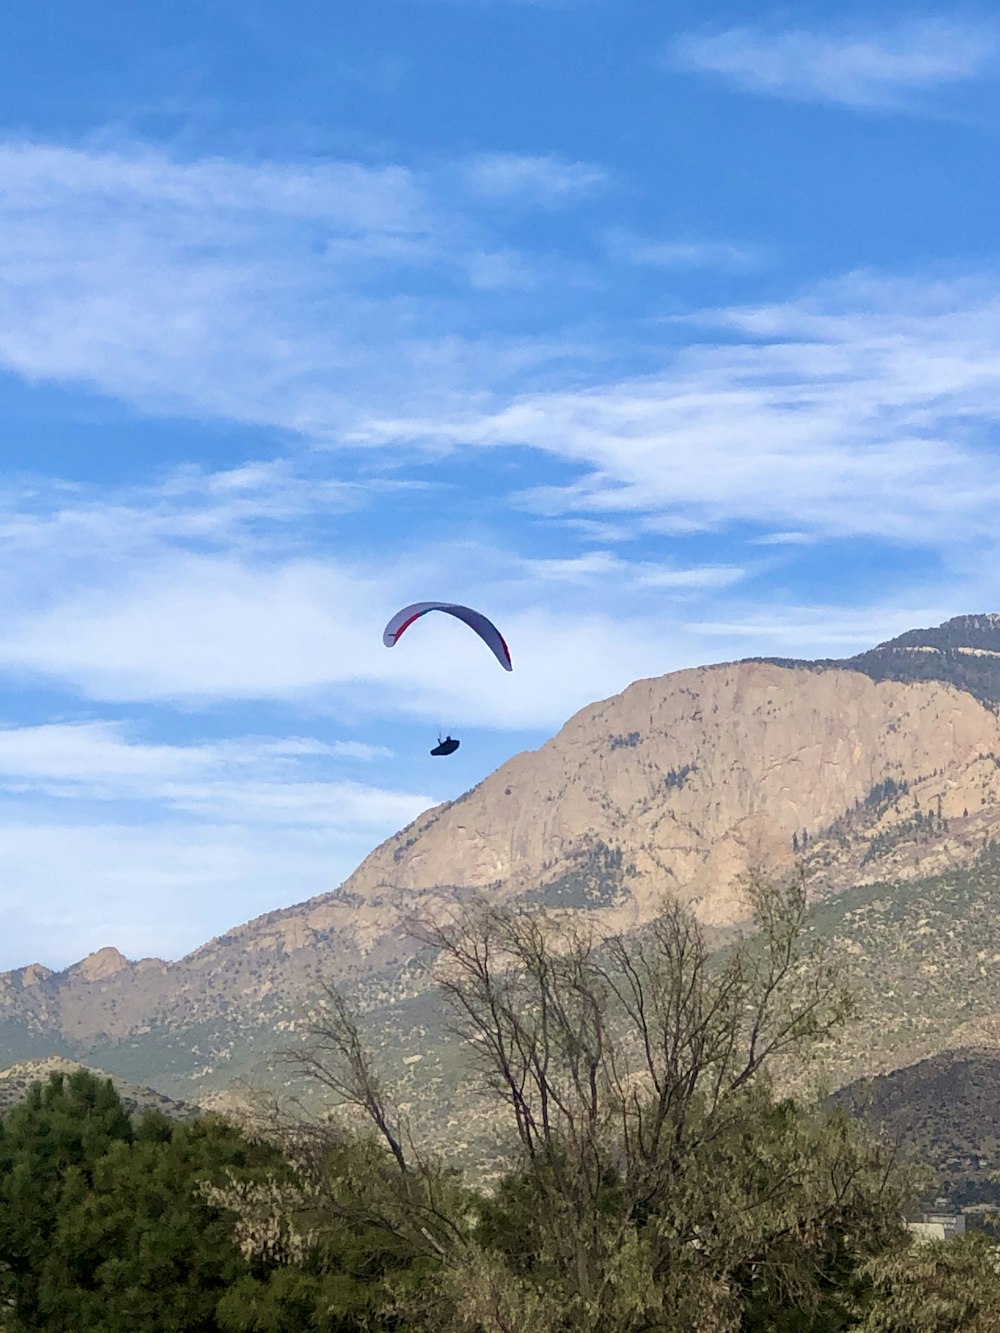 person riding parachute over brown rocky mountain during daytime